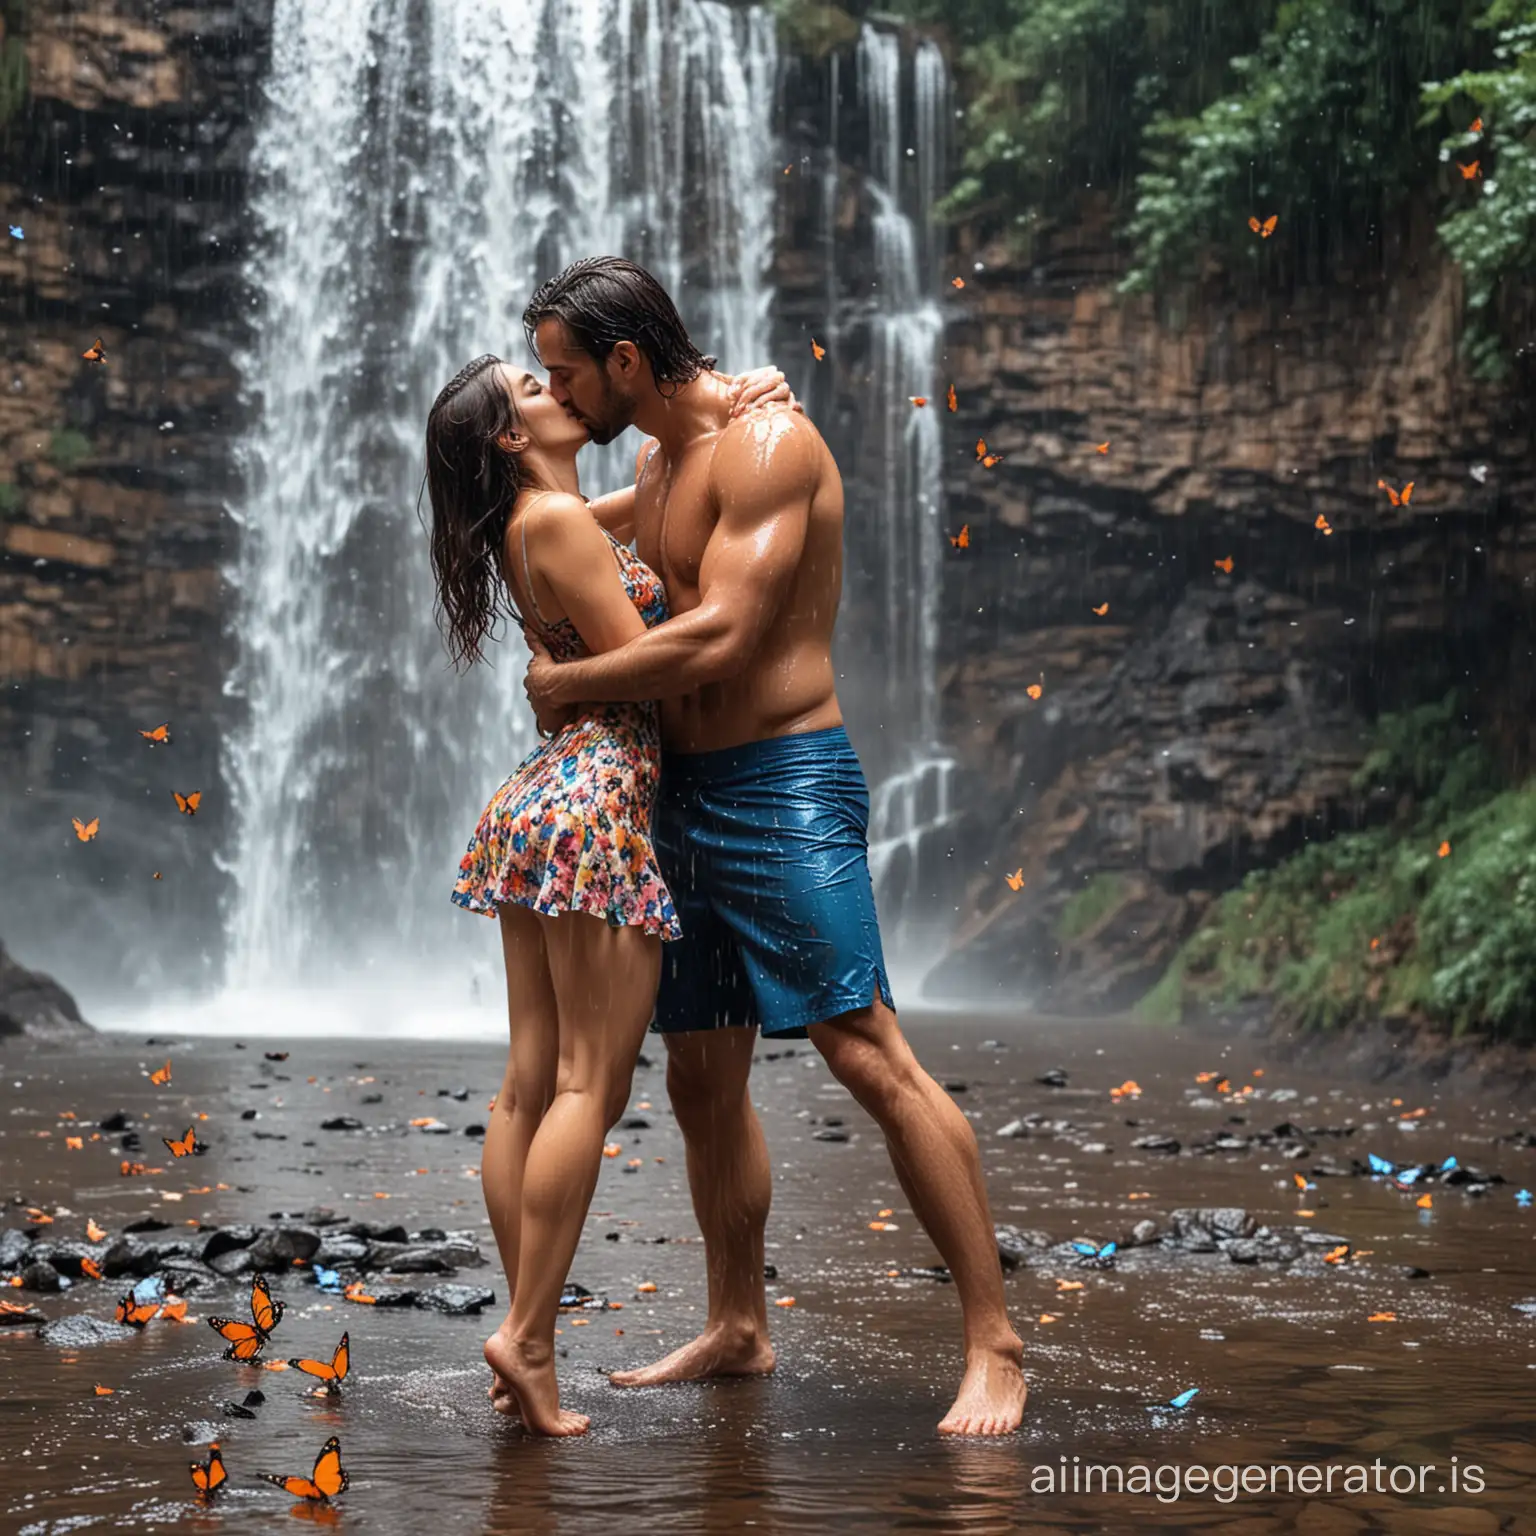 handsome sexy wet man aggressively passionately kissing mini dress wearing hot sexy wet woman on a wet bed in rain near a waterfall with lots of butterflies flying around